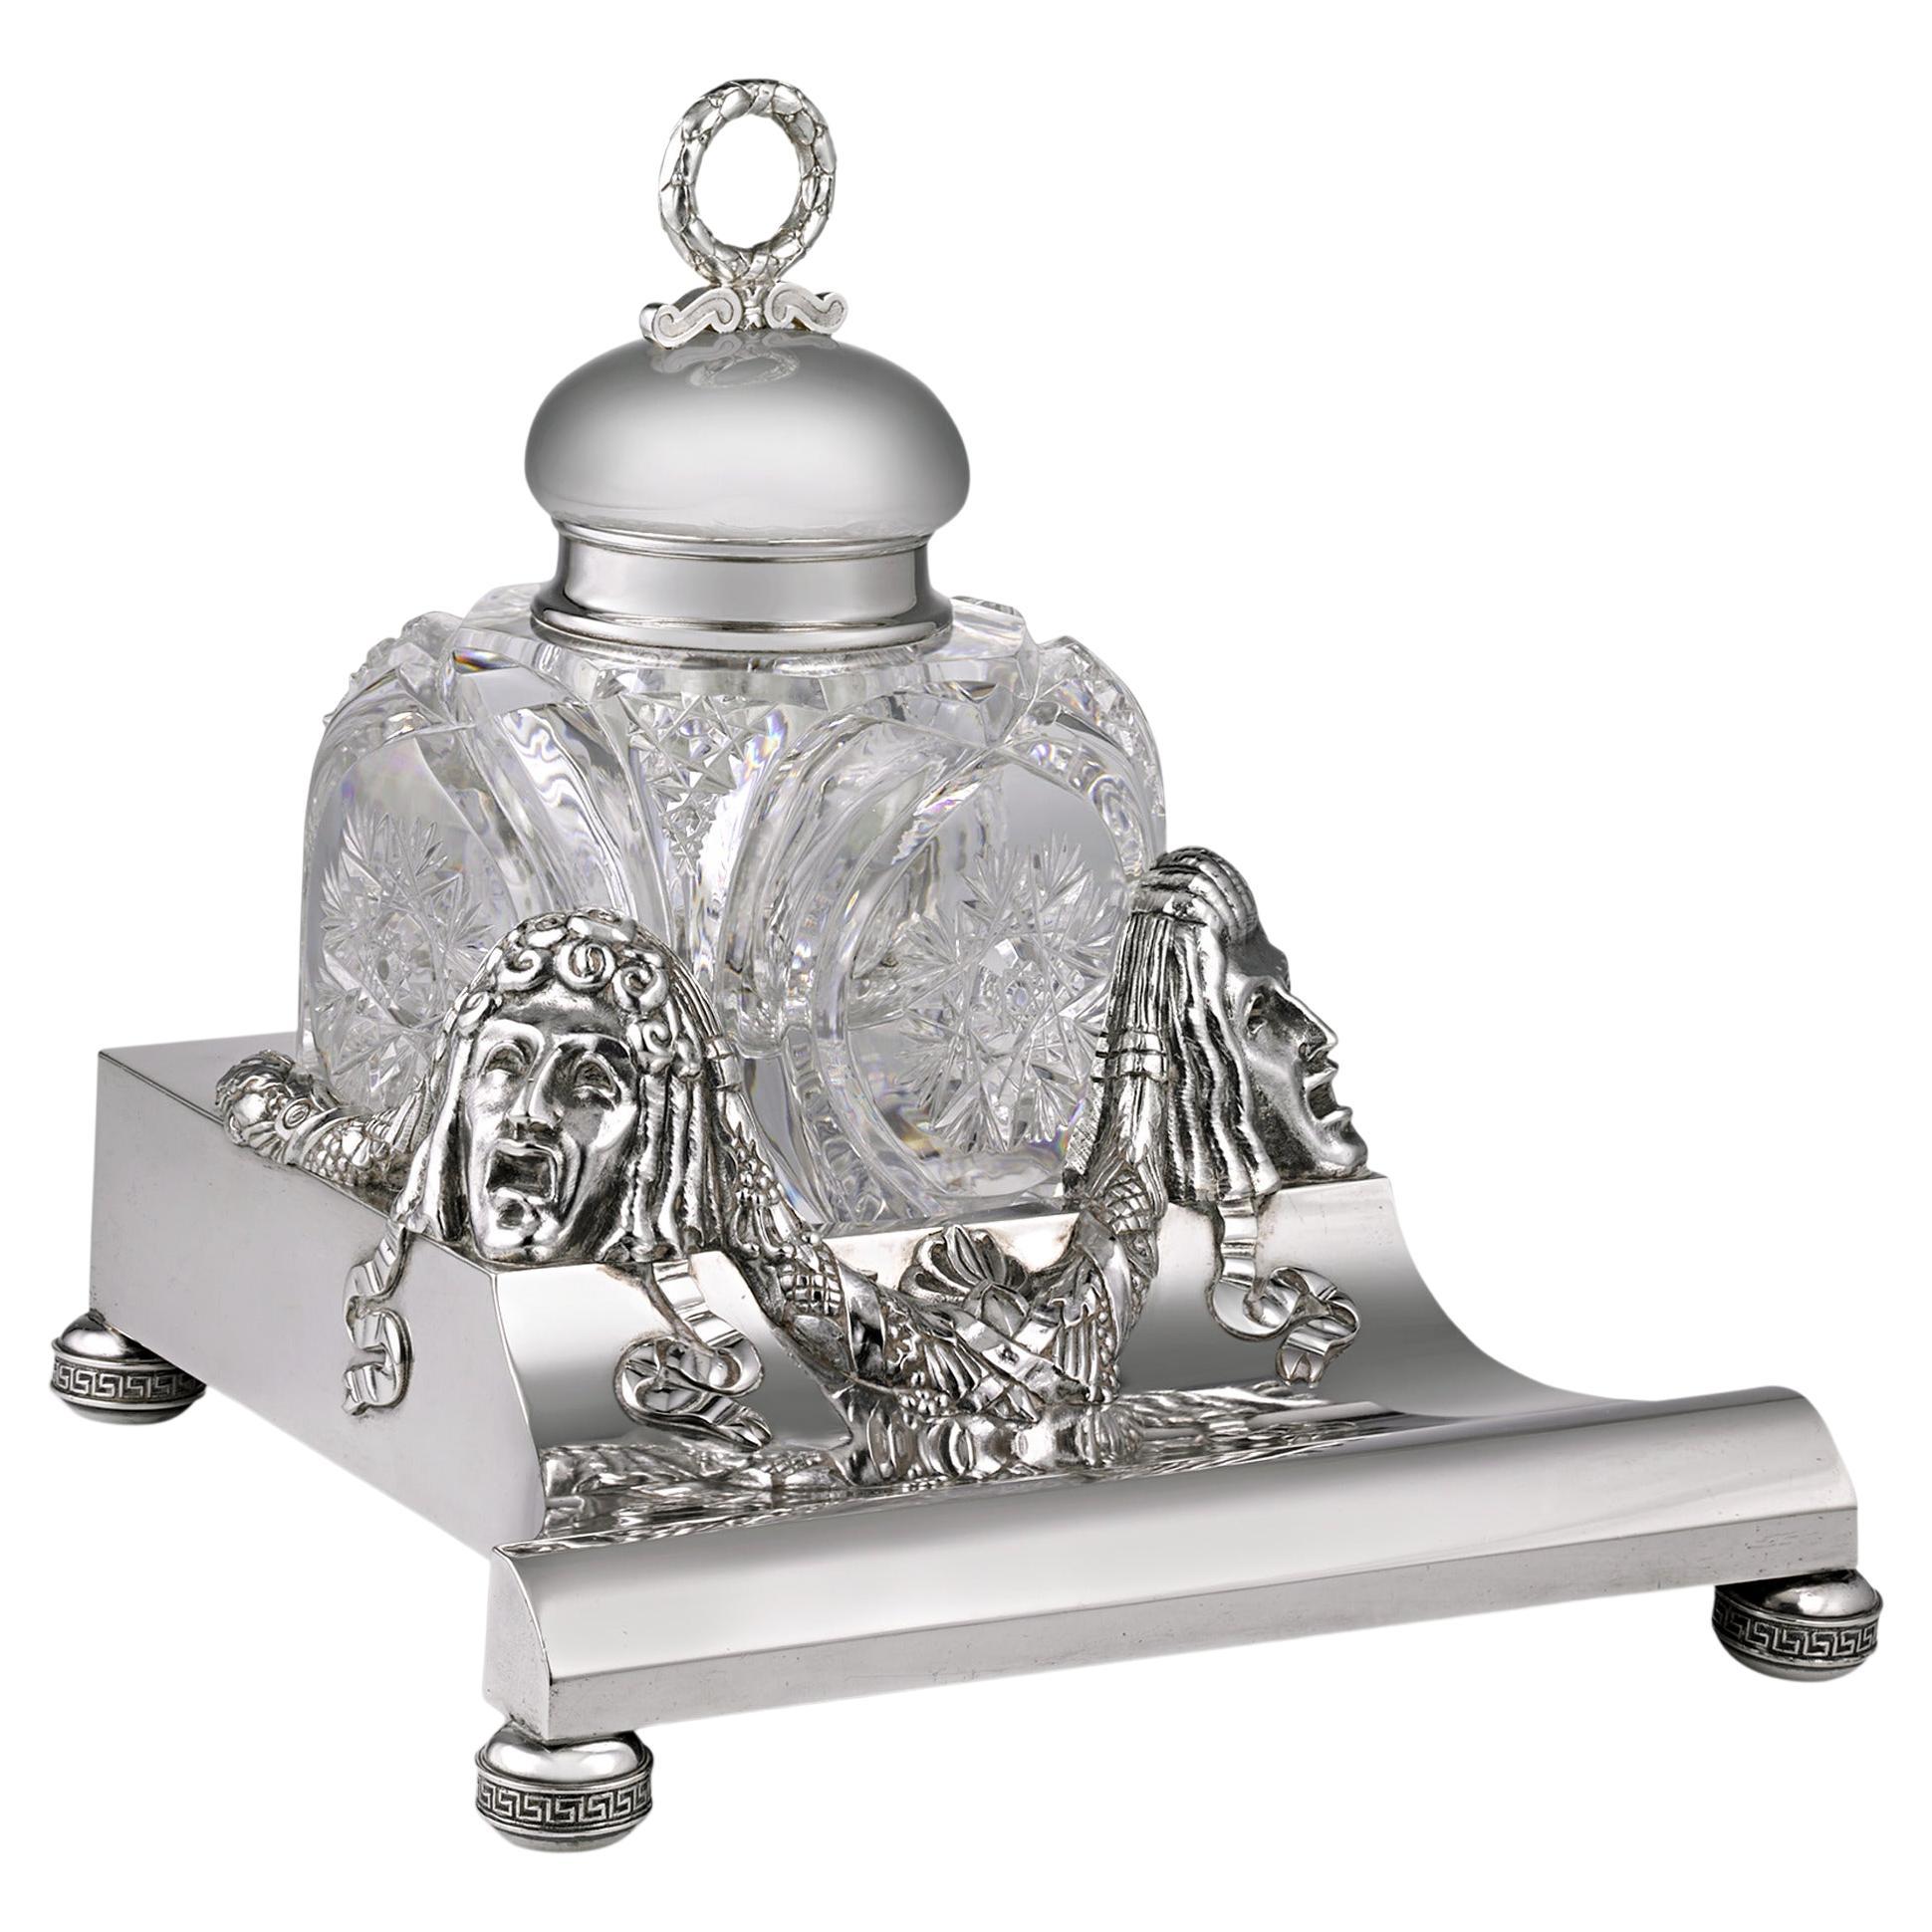 Fabergé Silver and Cut Glass Inkwell